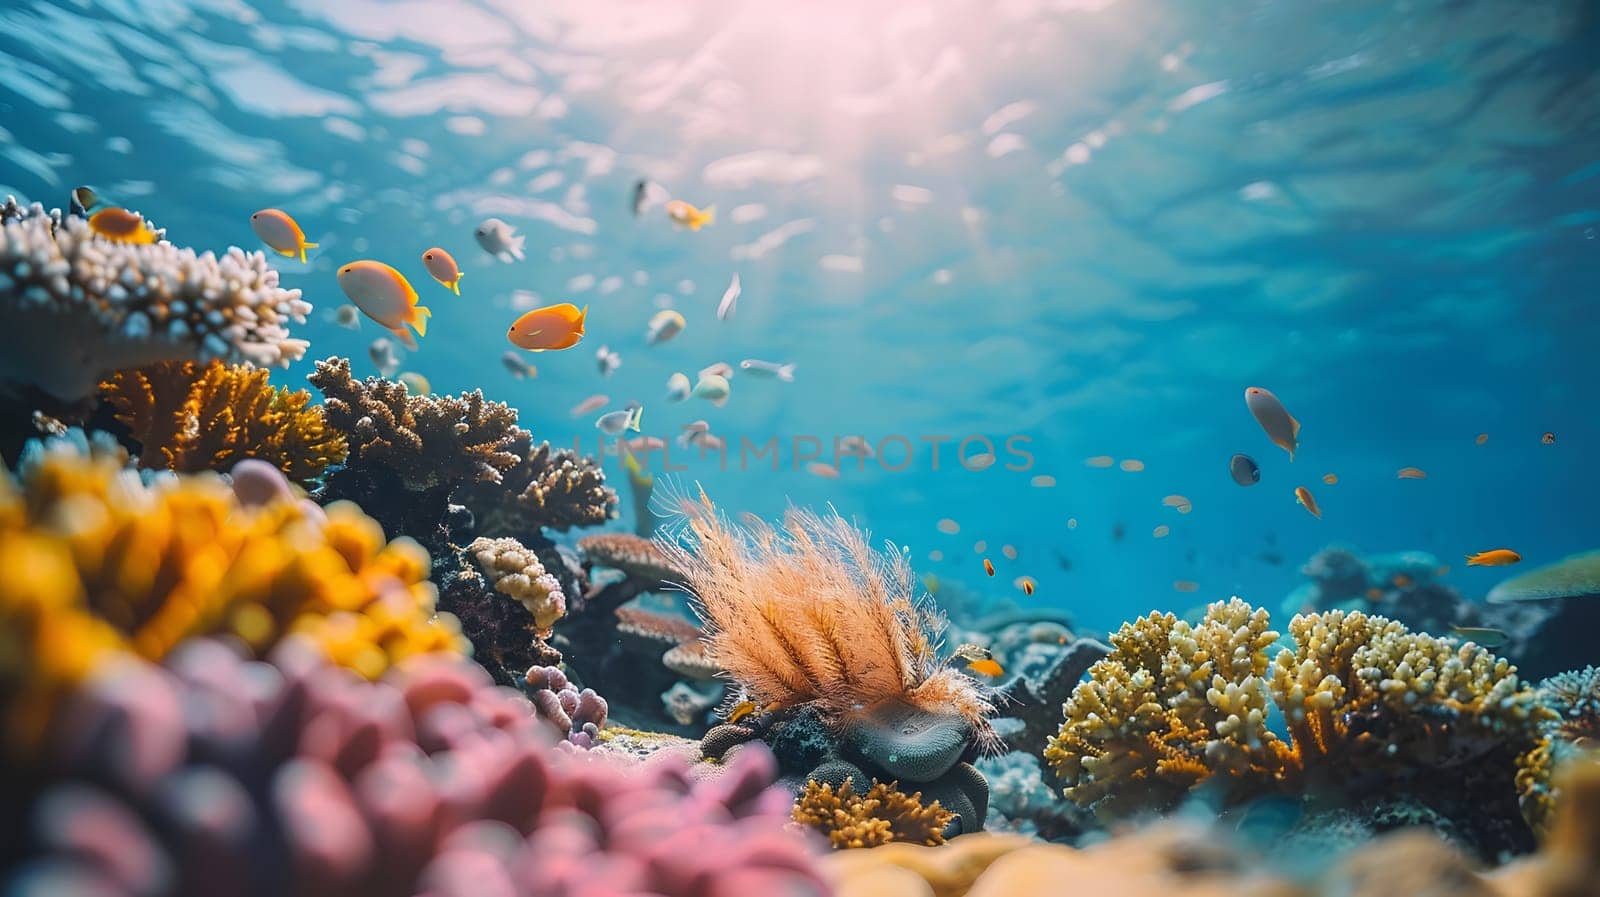 Underwater ecosystem teeming with colorful fish, vibrant corals, and aquatic plants, creating a stunning coral reef in the oceans fluid waters